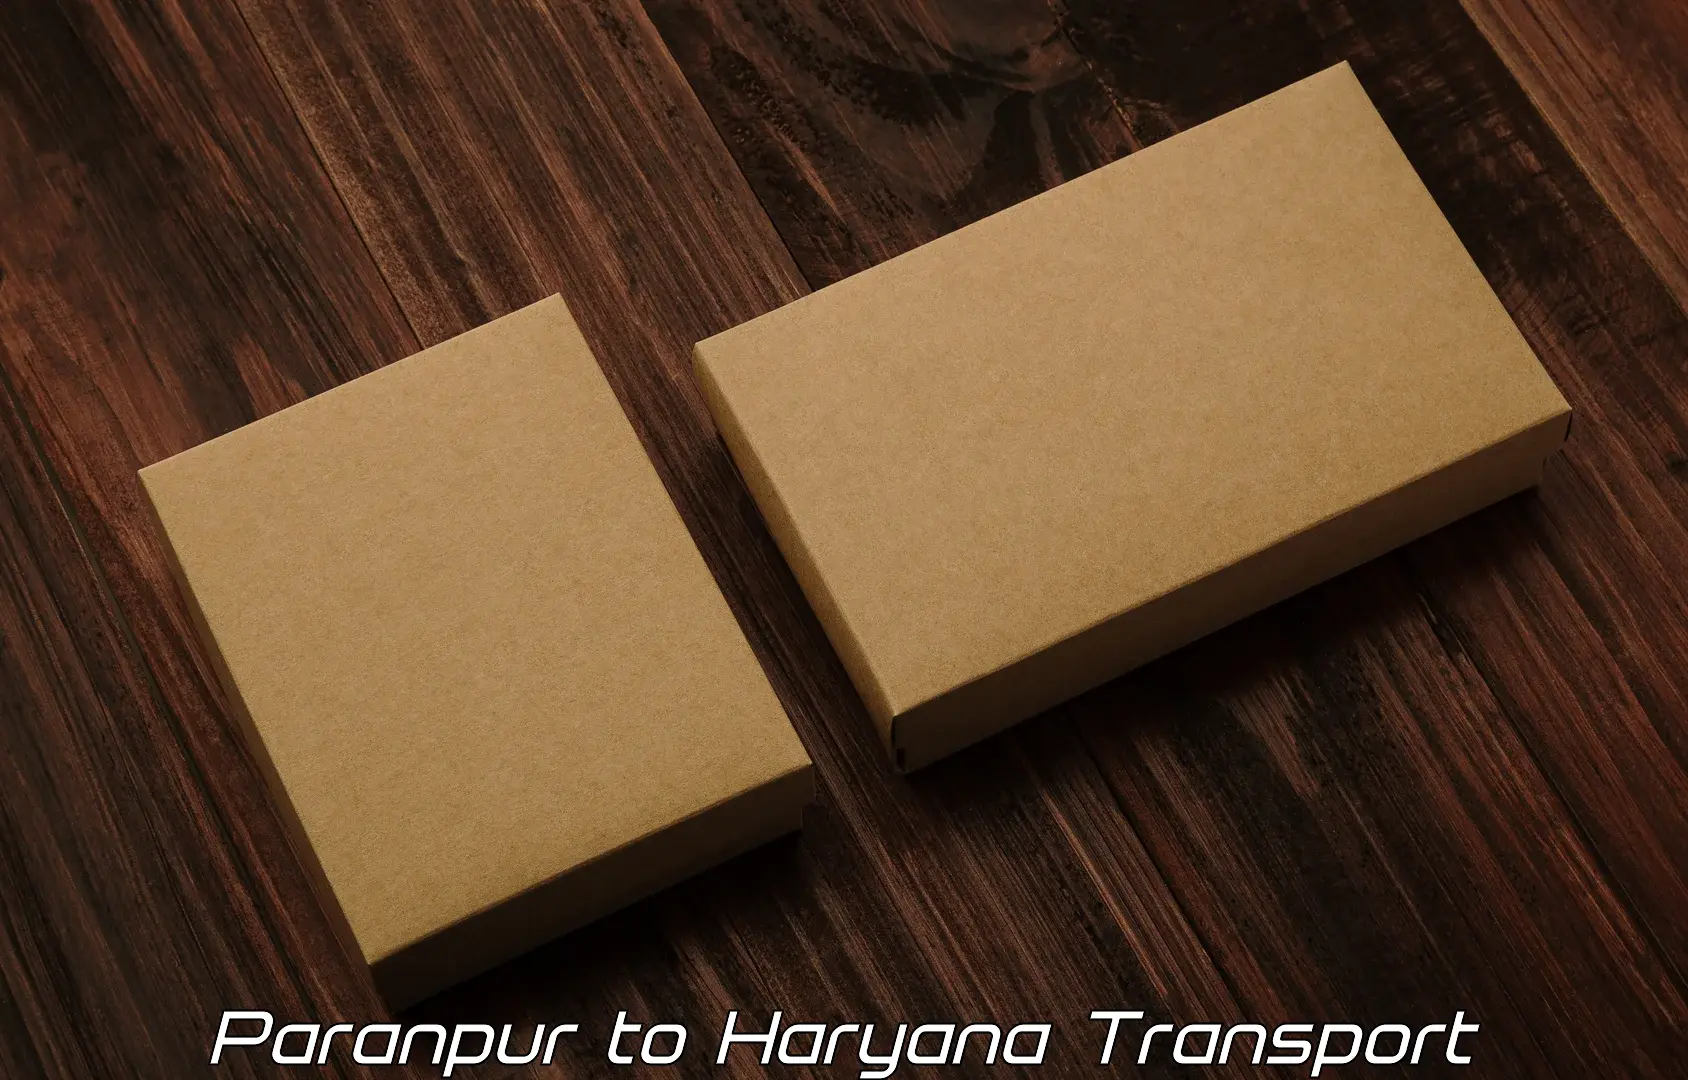 Domestic goods transportation services in Paranpur to Barwala